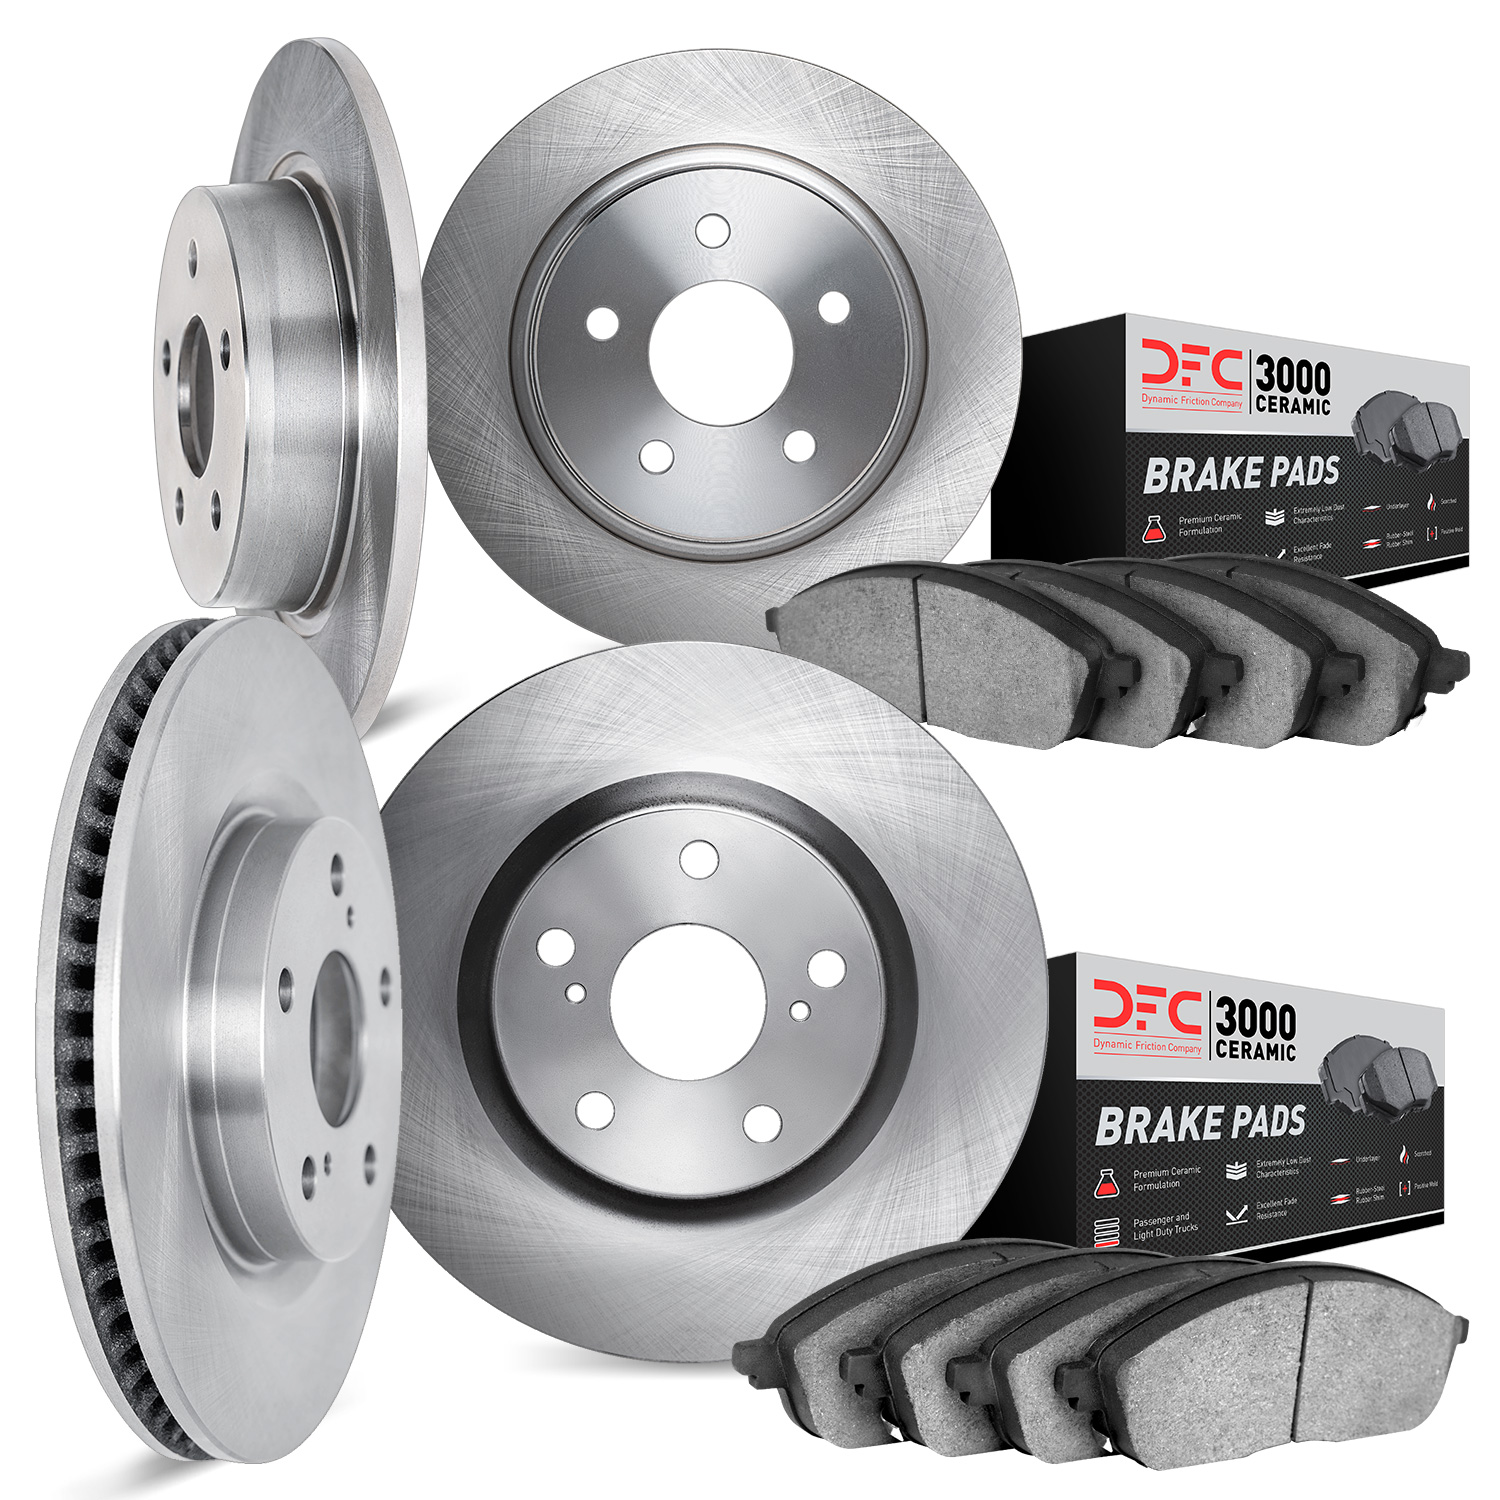 6304-76077 Brake Rotors with 3000-Series Ceramic Brake Pads Kit, Fits Select Lexus/Toyota/Scion, Position: Front and Rear